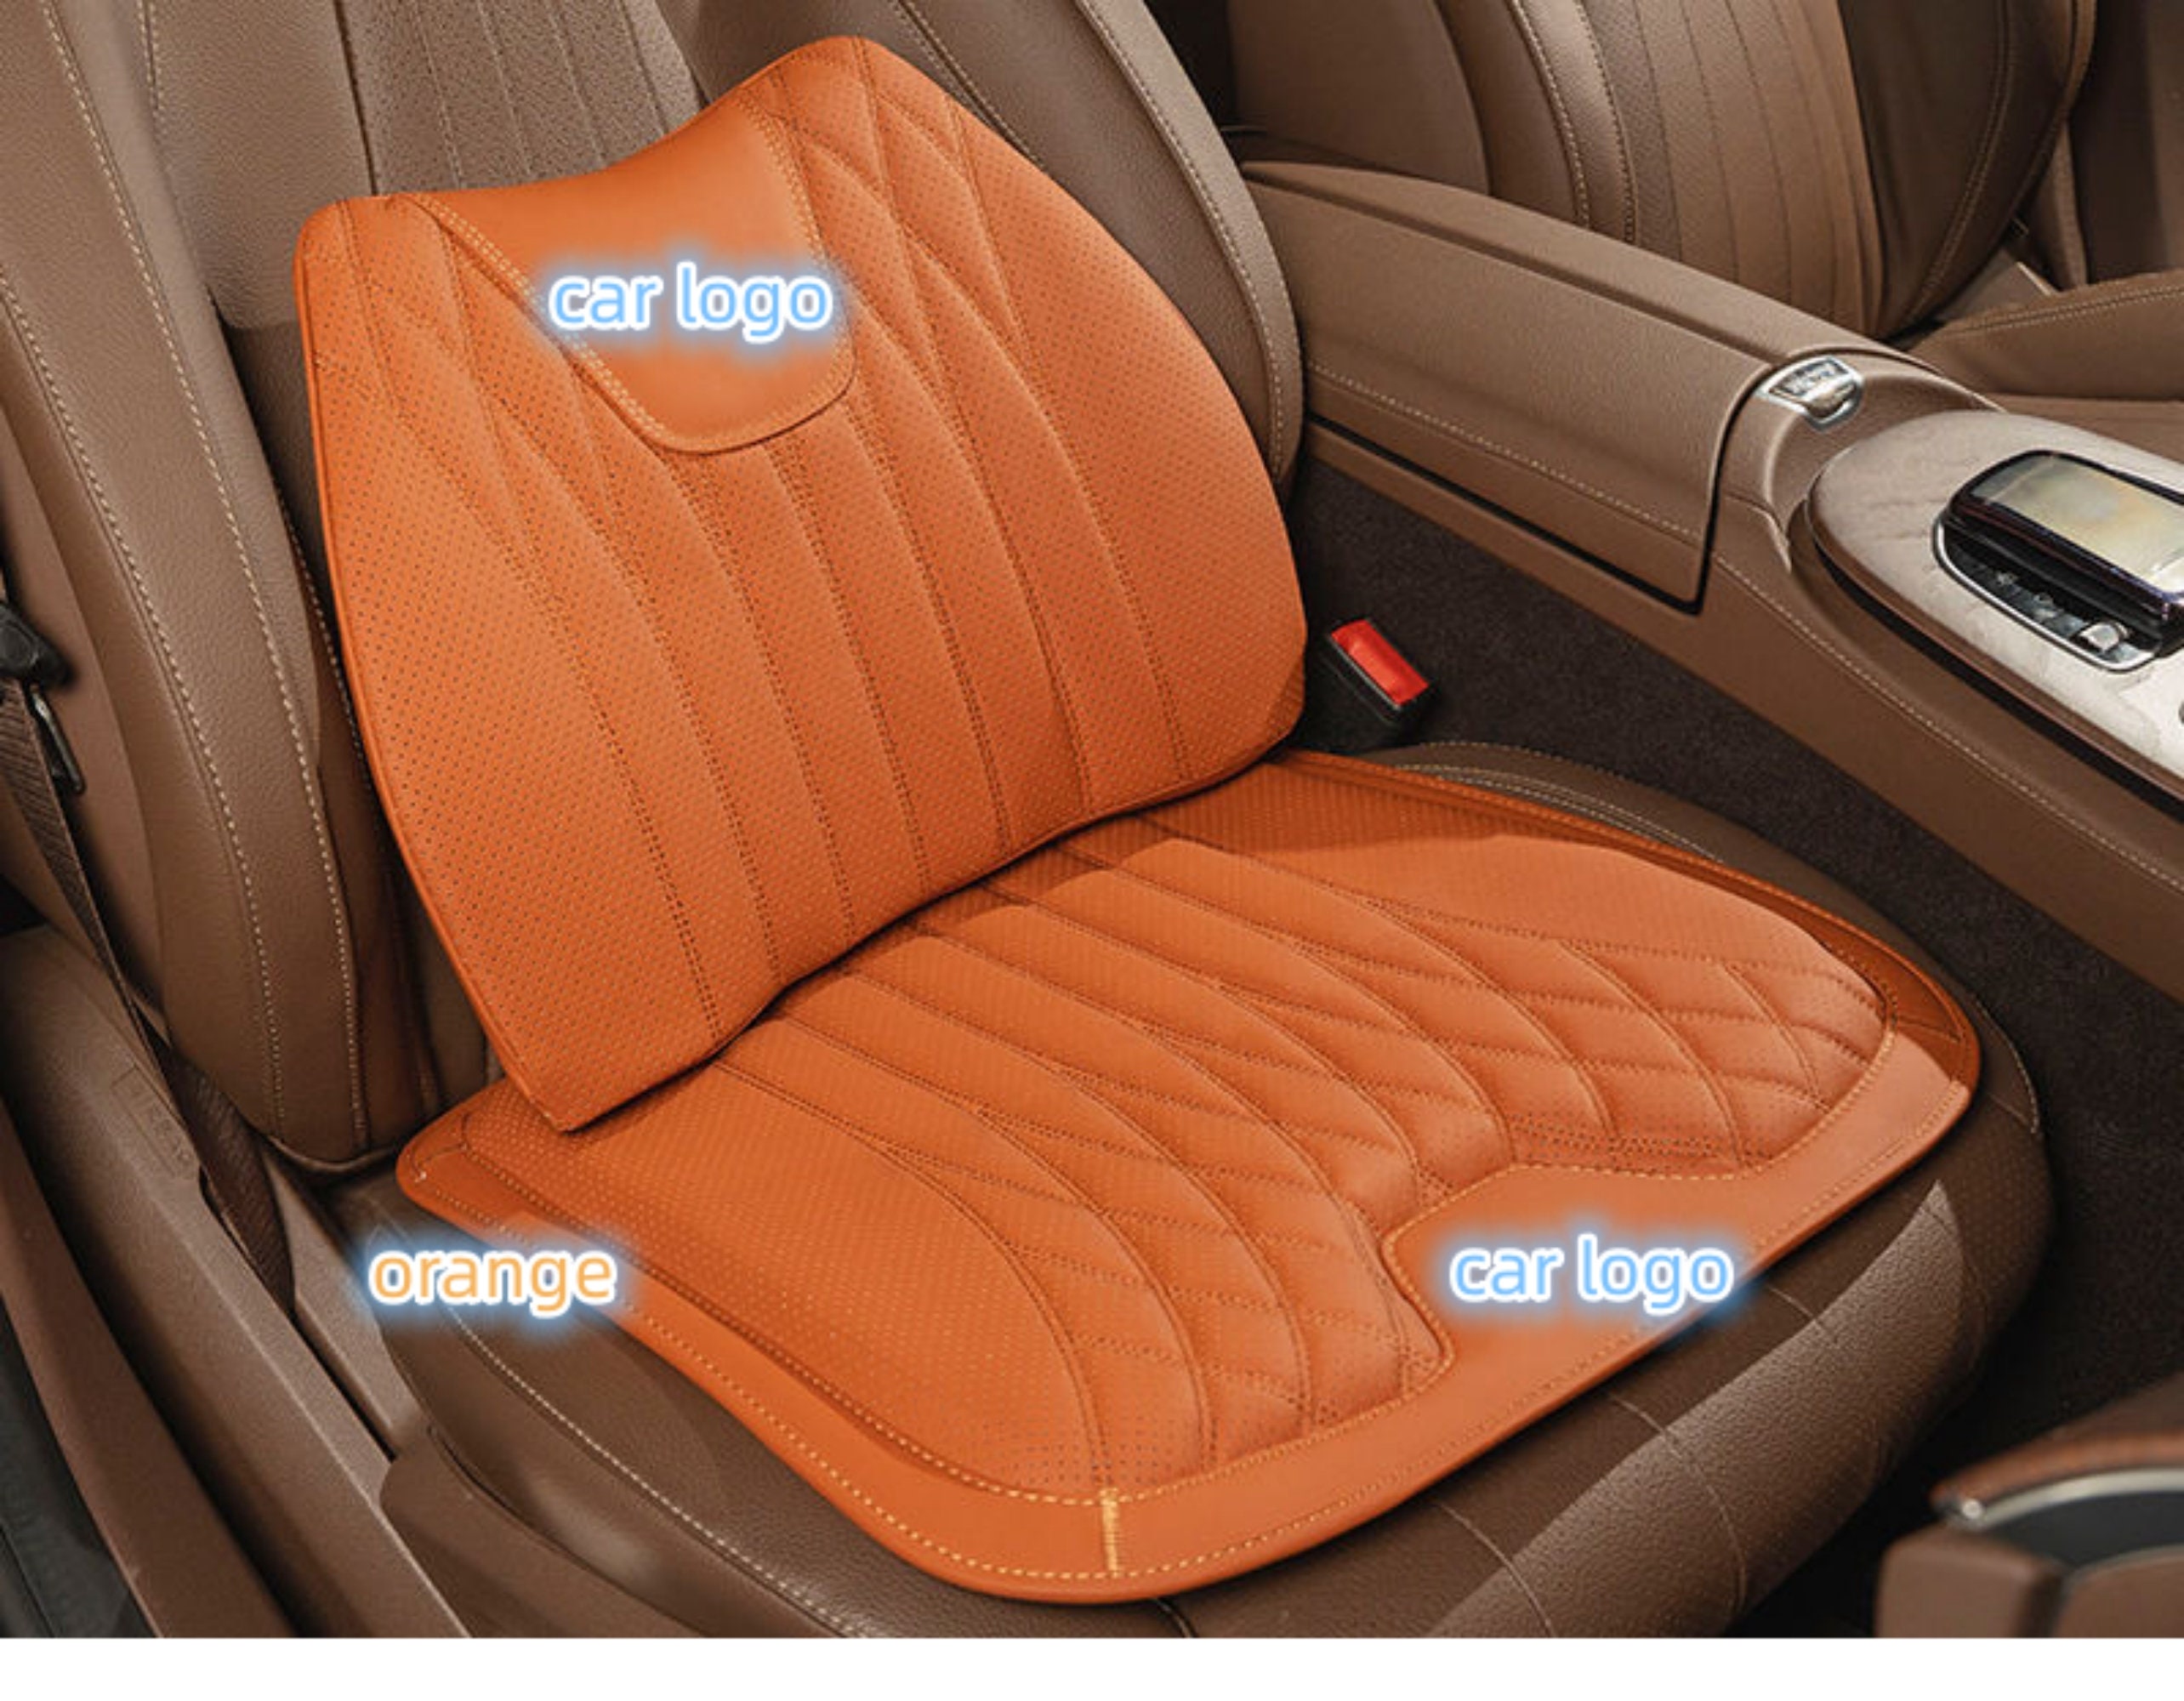 Efforest Car Seat Cushion for Driving, Memory Foam Car Seat Cushion, Driver  Seat Cushion for Tailbone Pain Relief, Car Lumbar Support for Driving